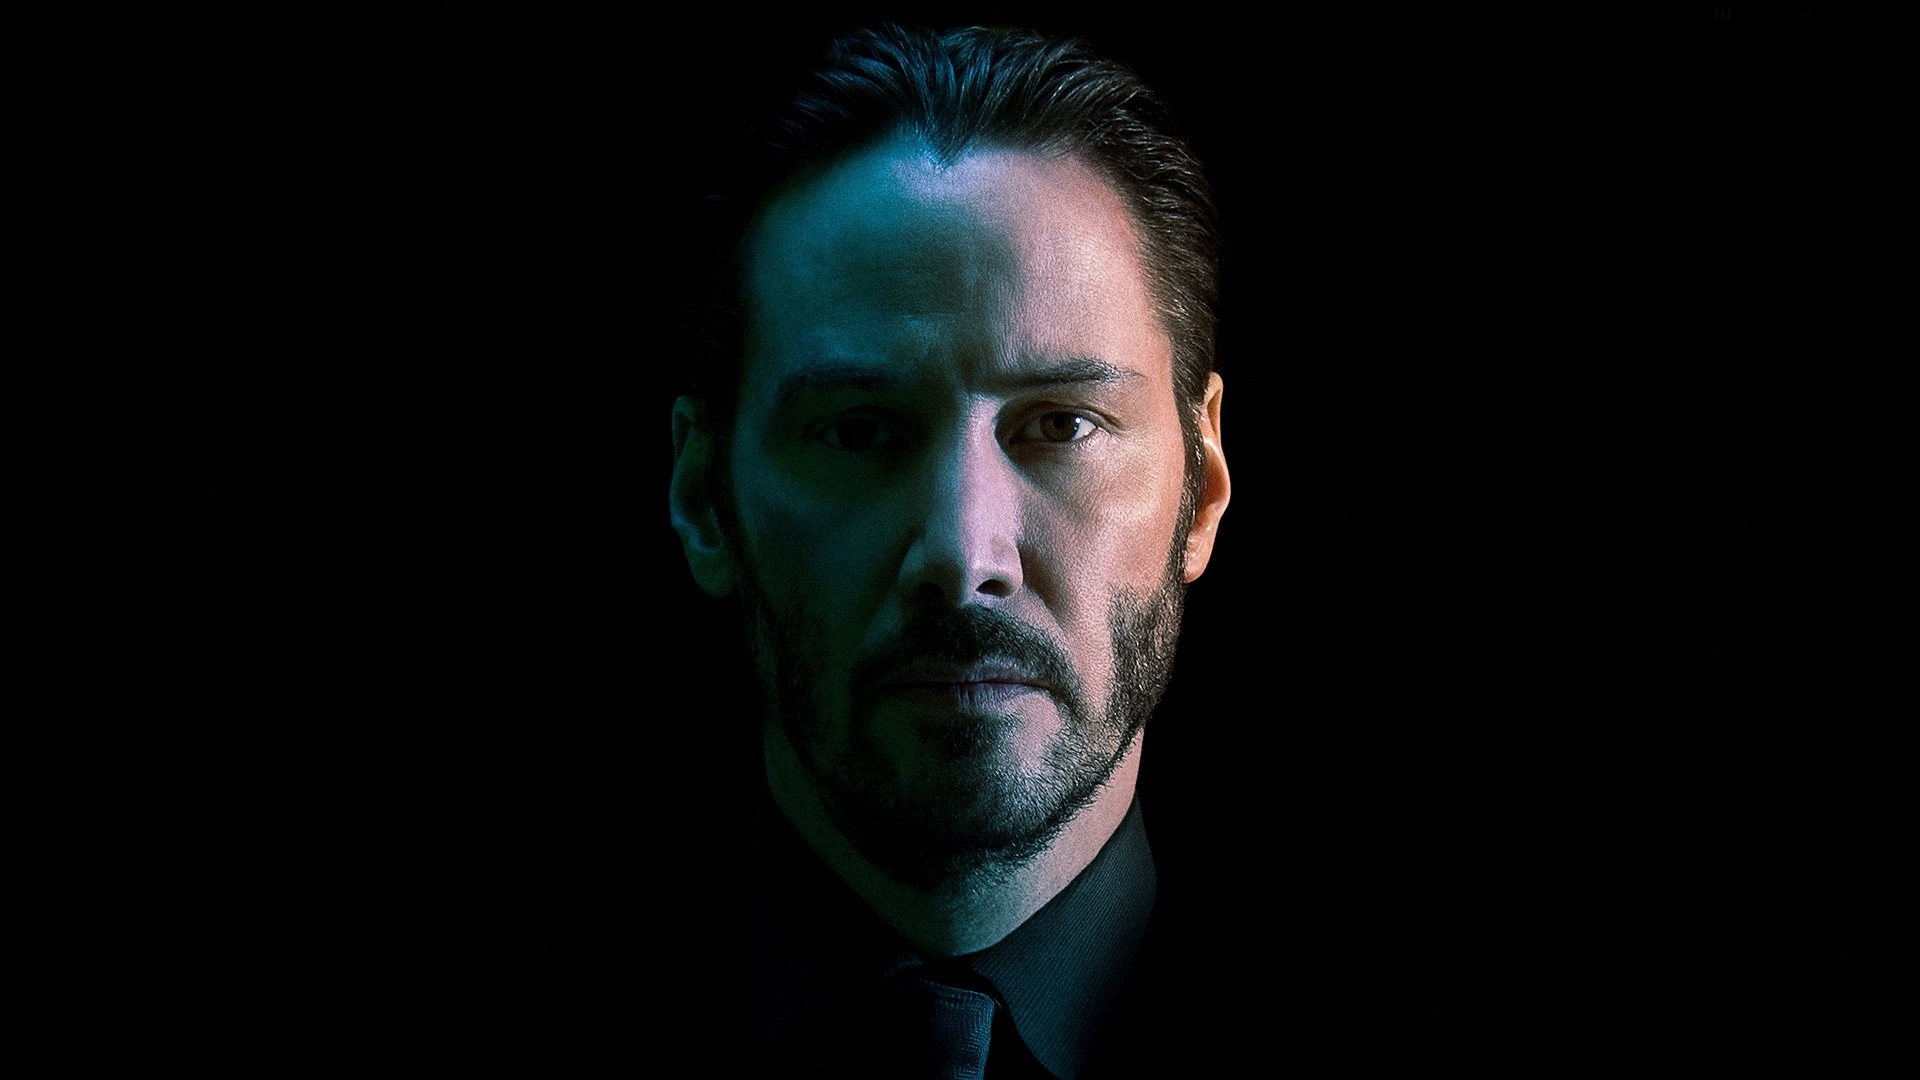 180+ Keanu Reeves HD Wallpapers and Backgrounds